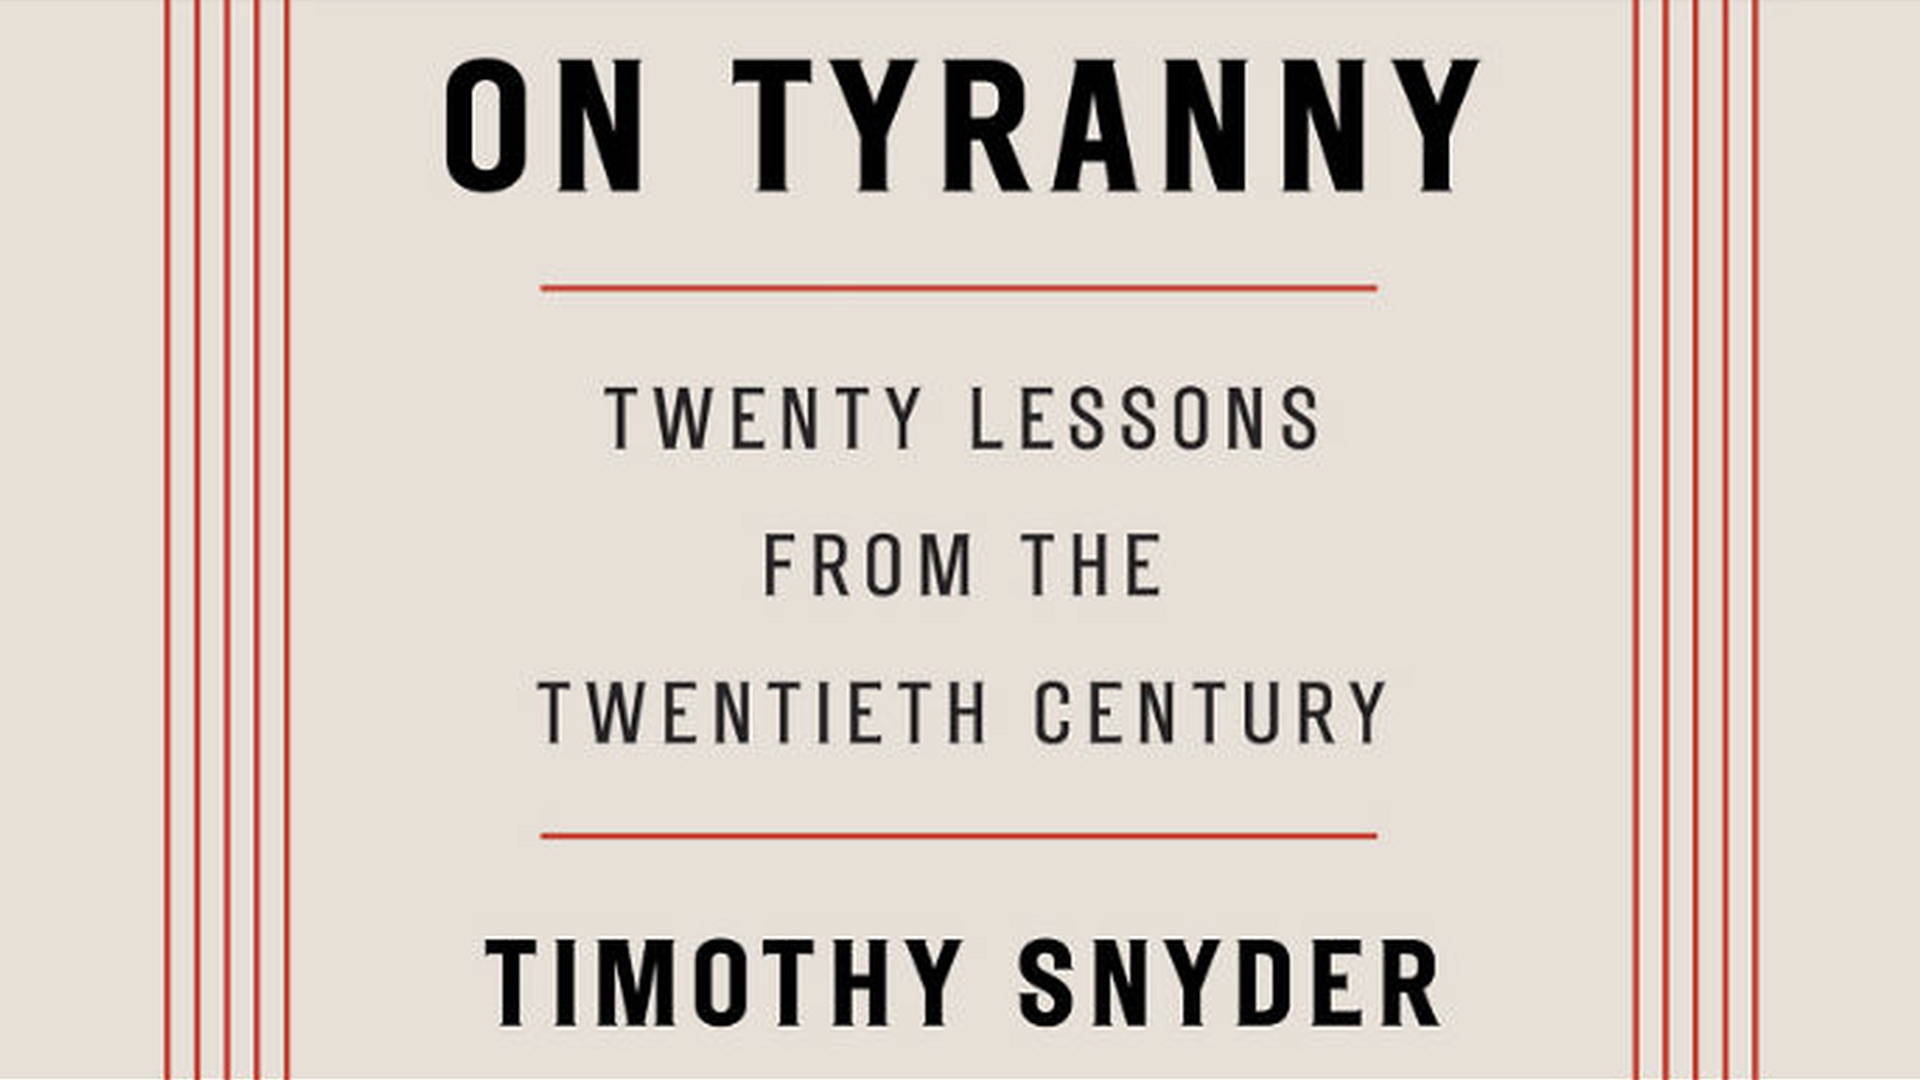 book on tyranny by timothy snyder